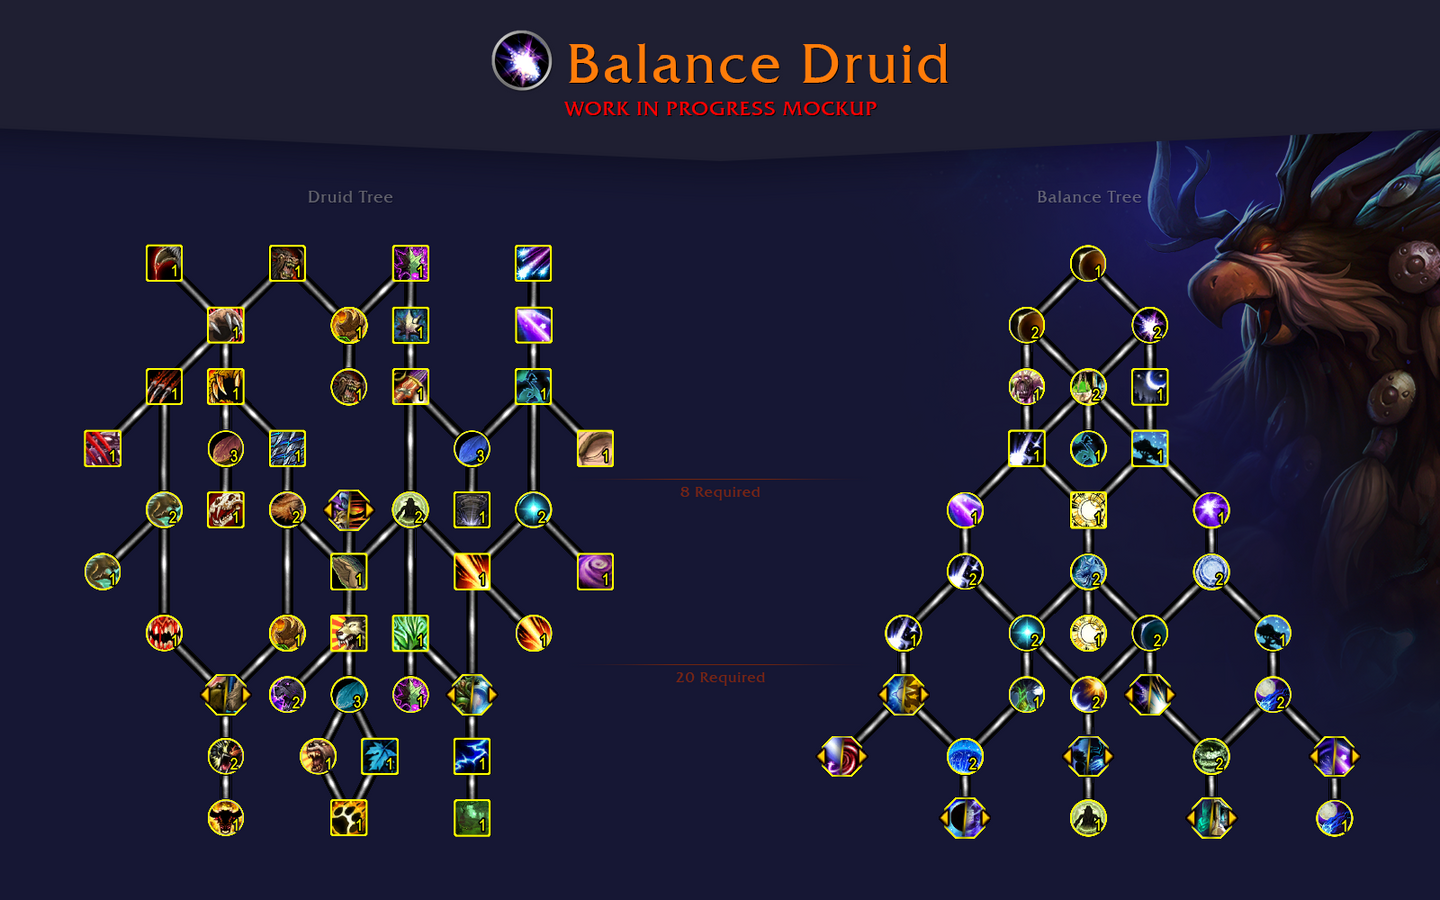 WoW Dragonflight: All Druid Talents and Abilities - Balance Druid Dragonflight Talents